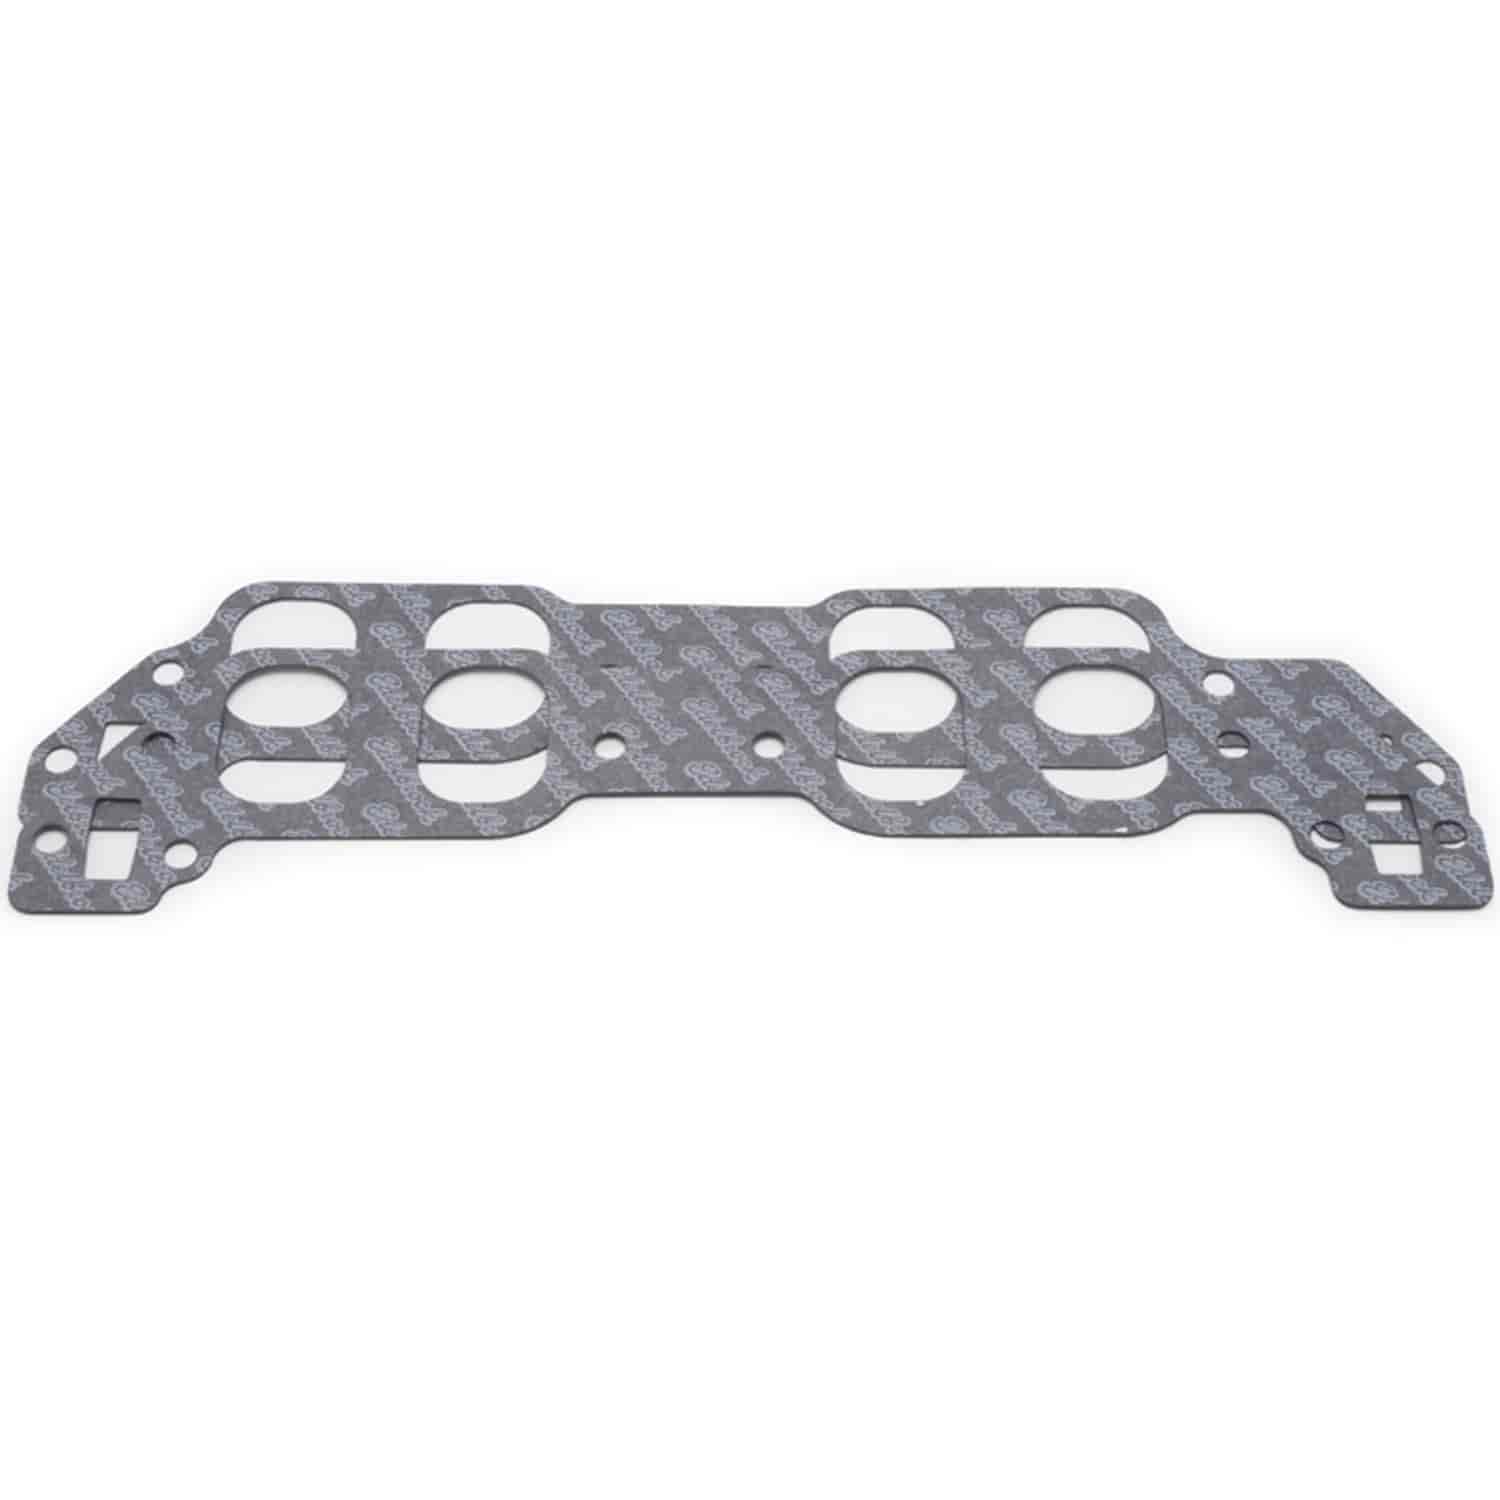 Intake Gaskets for Big Block Chevy with Big Victor Spread Port Heads